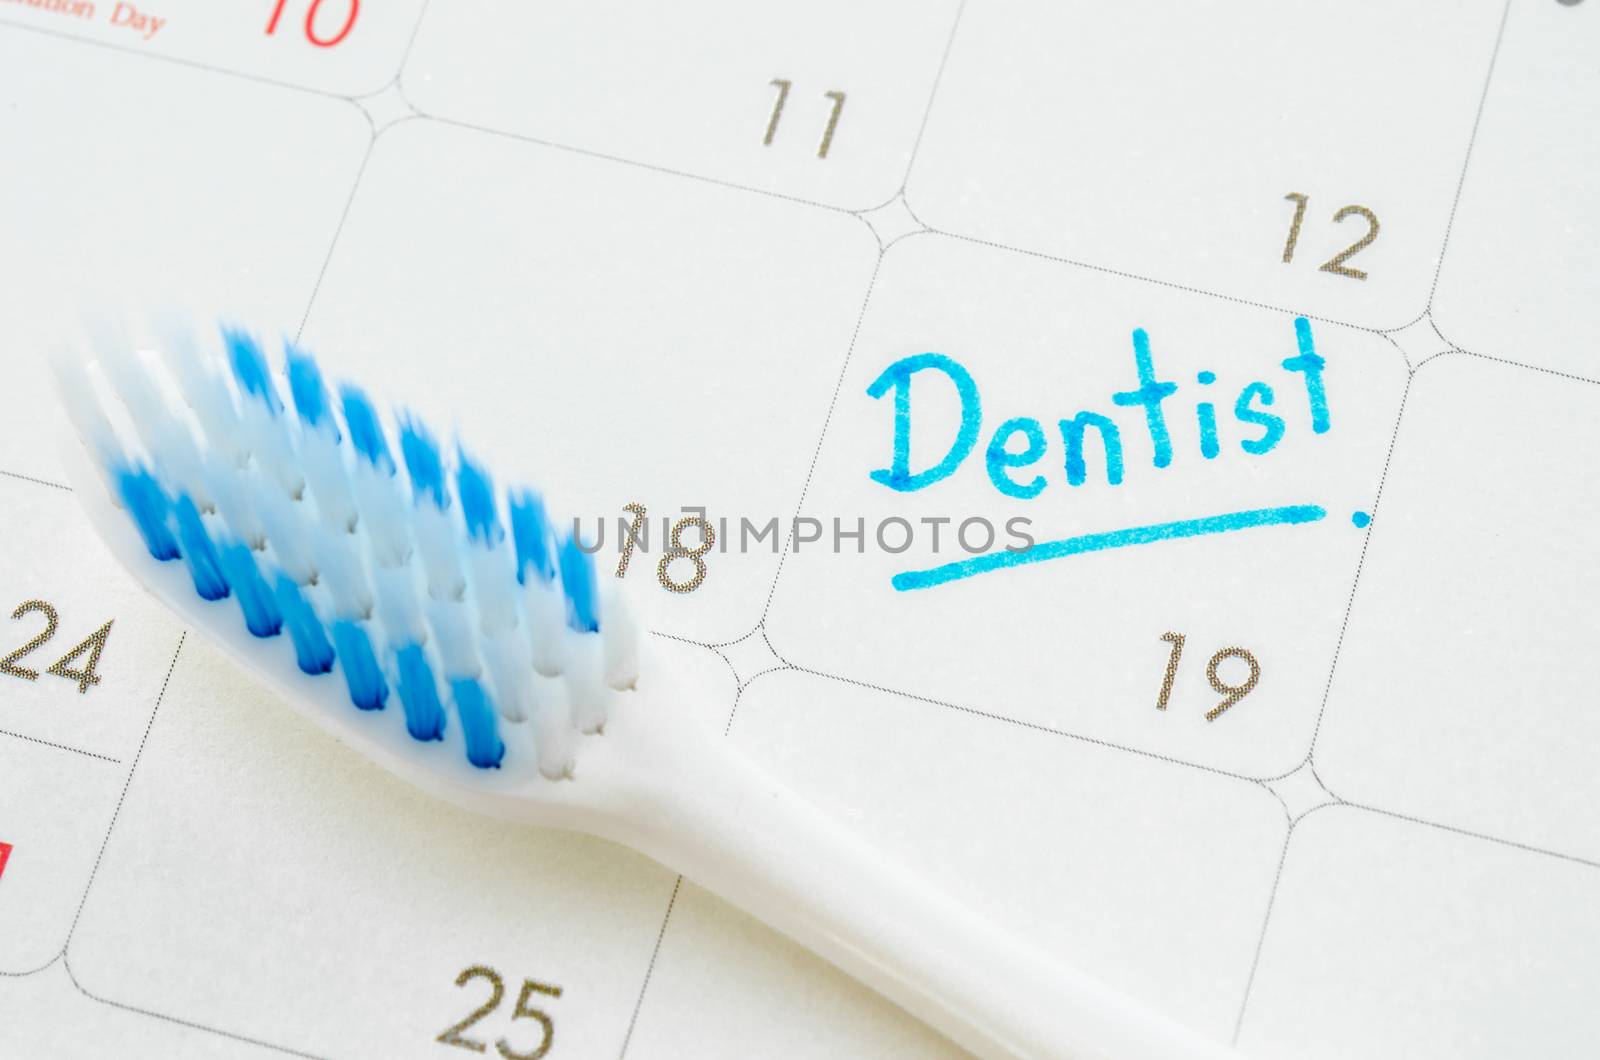 The words Dentist written on a calendar to remind you an important appointment with tooth brush.